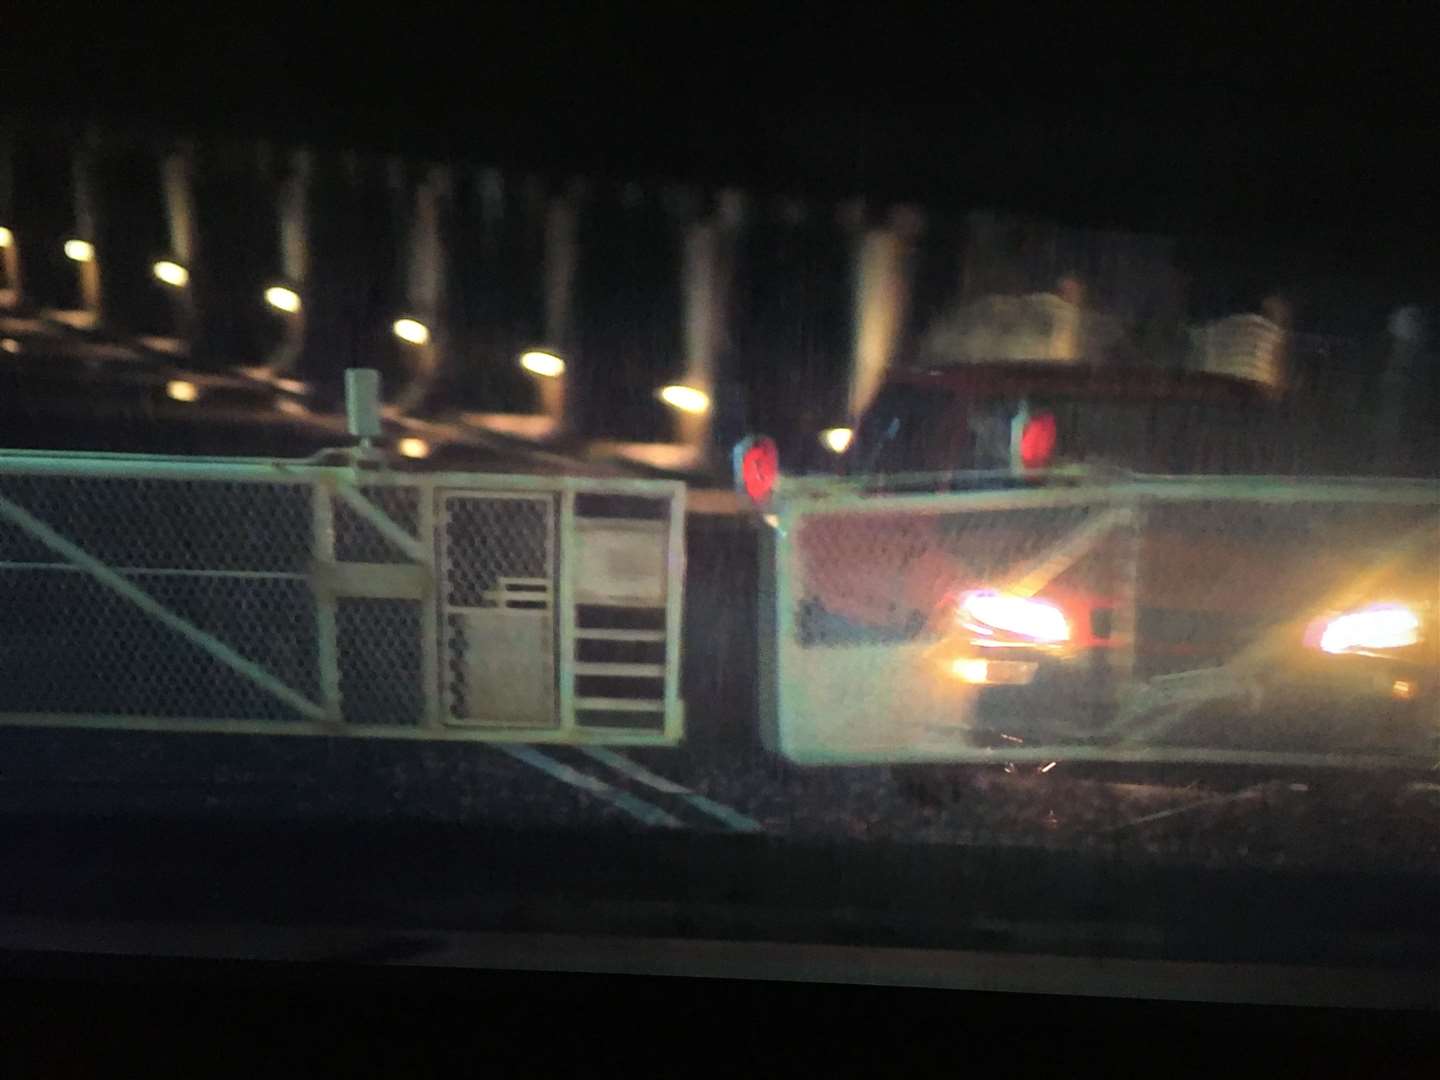 Going: Car crashes through barriers at Sheppey's Kingsferry Bridge in the ITV drama Too Close. Picture: ITV